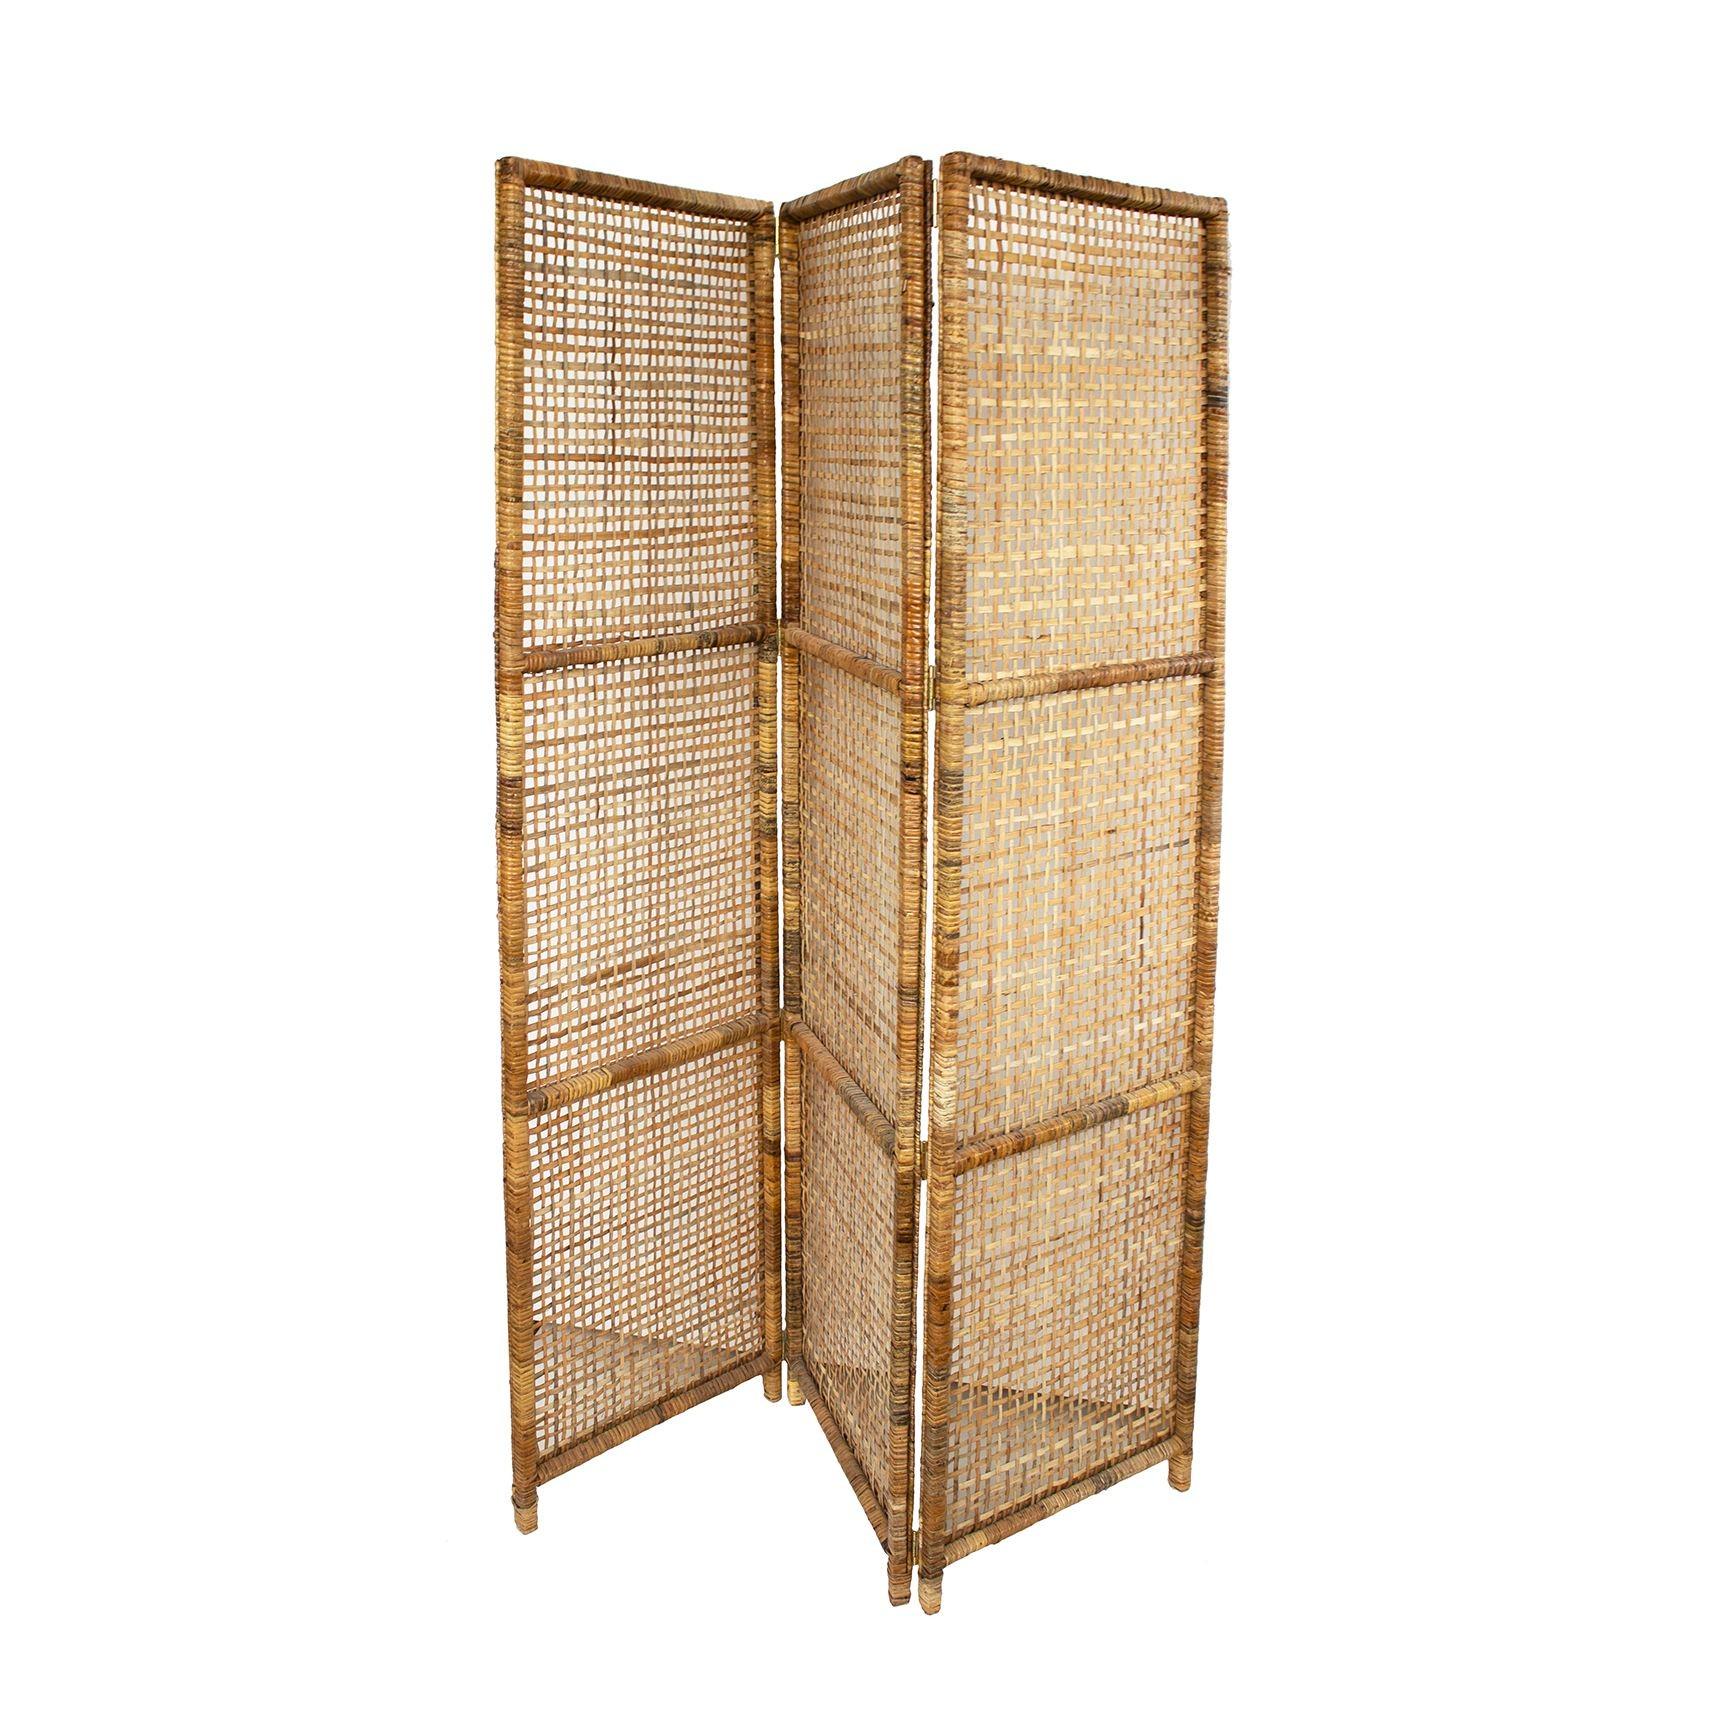 Vintage 1970s

Vintage boho folding screen in wicker. Hinged design in three sections that fold flat. Great texture for any interior. Could also be used as a photo backdrop or to divide a room. Great texture and diffusion of light, folds compactly